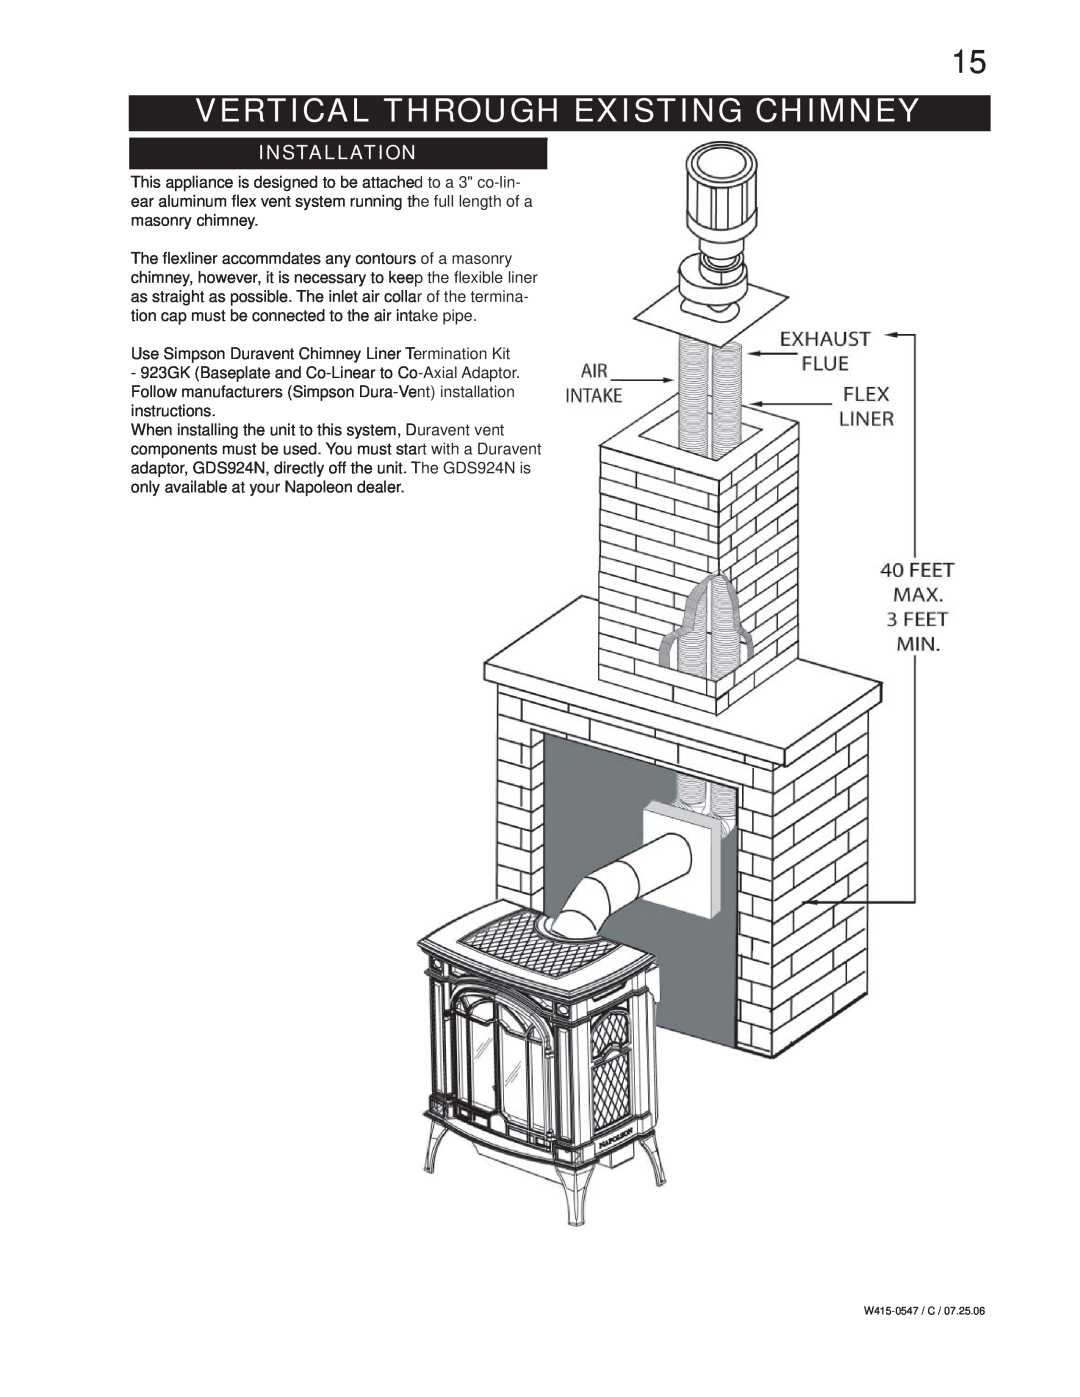 Napoleon Fireplaces GDS25P, GDS25N manual Vertical Through Existing Chimney, Installation 